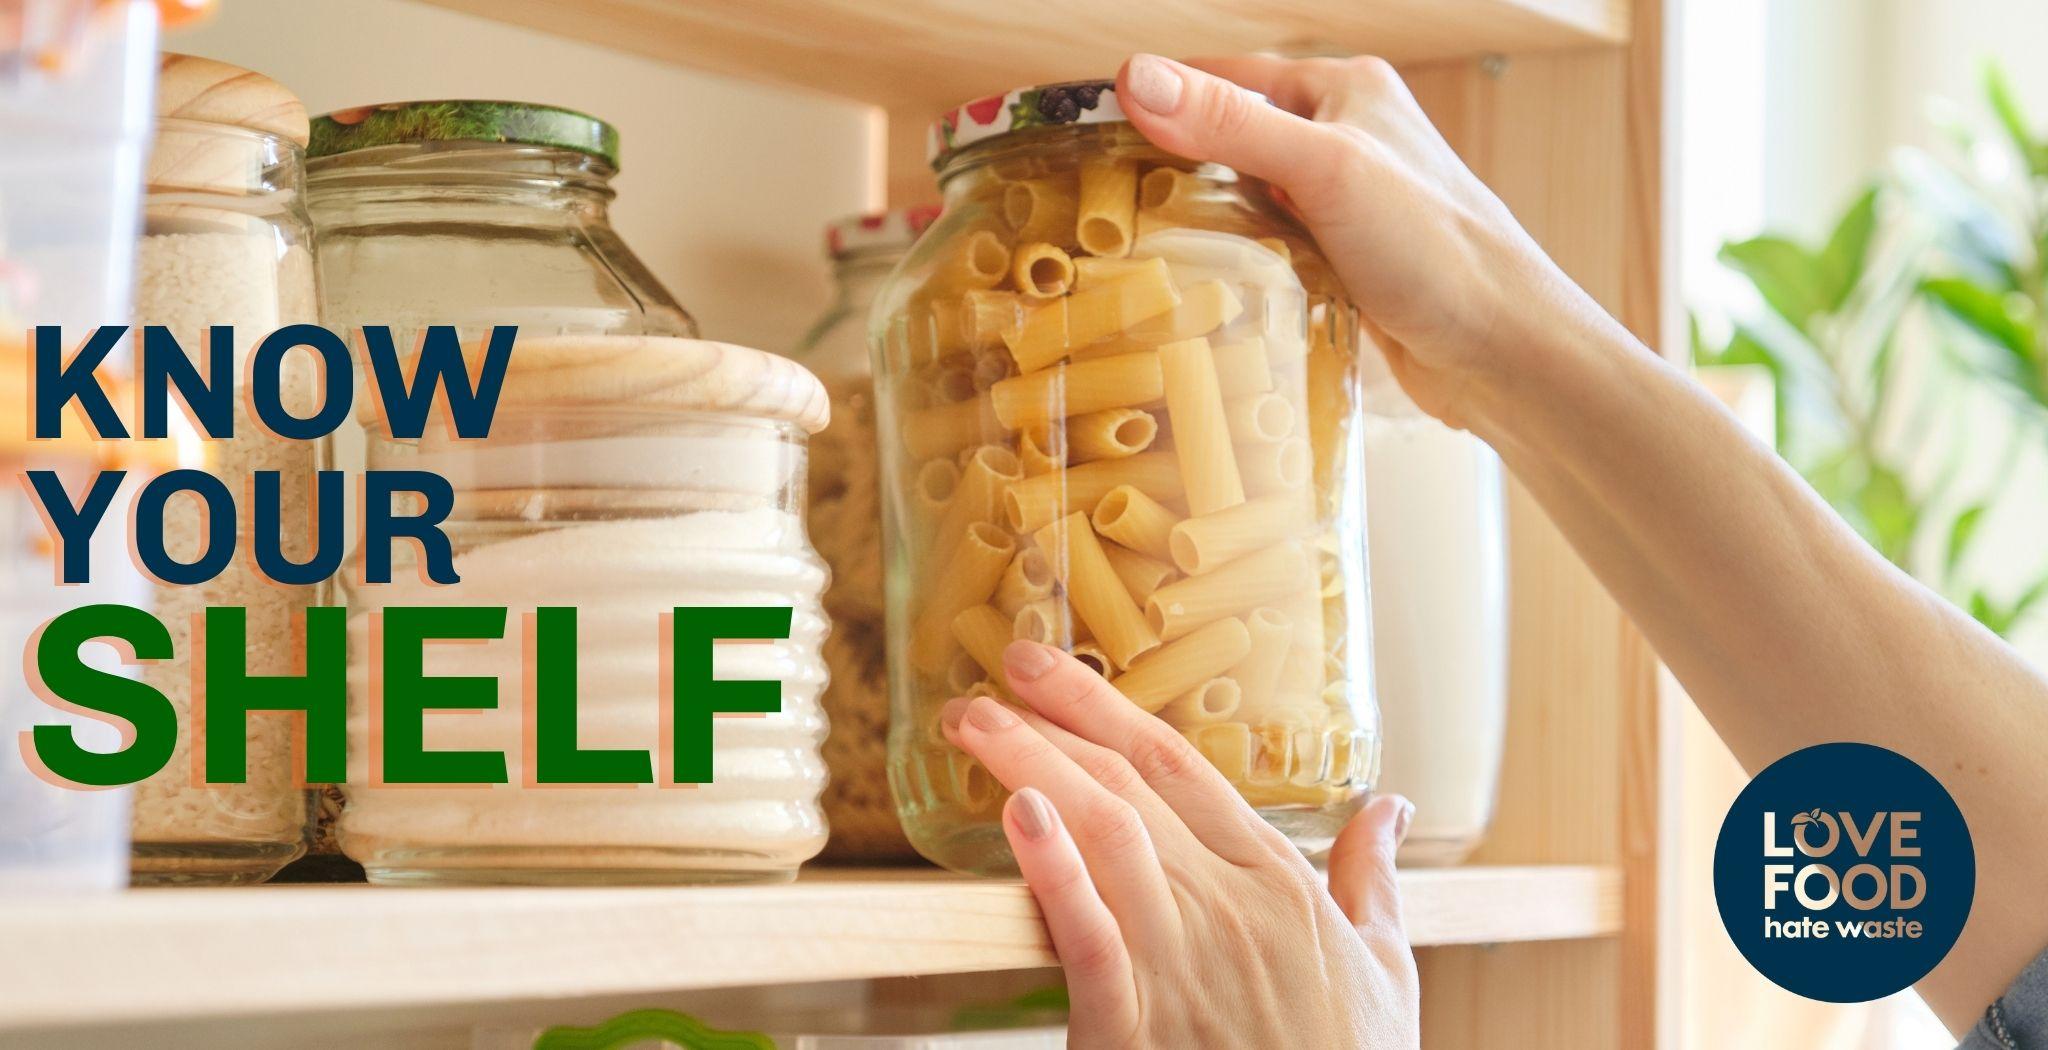 hands placing a jar of pasta on a pantry shelf